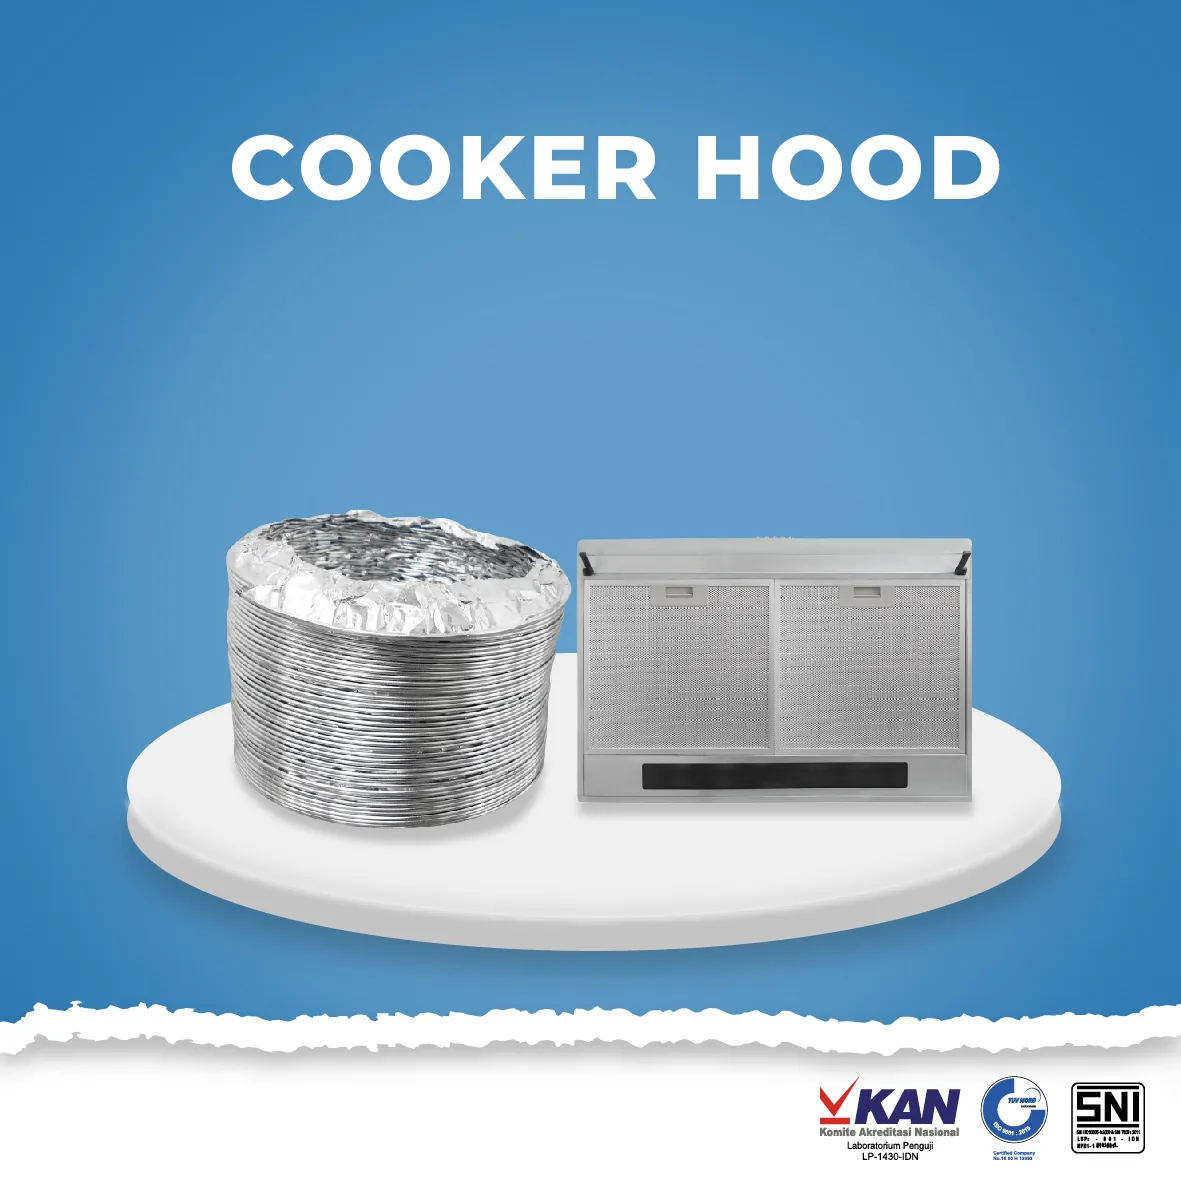  Cooker Hood other fan template cover website 03